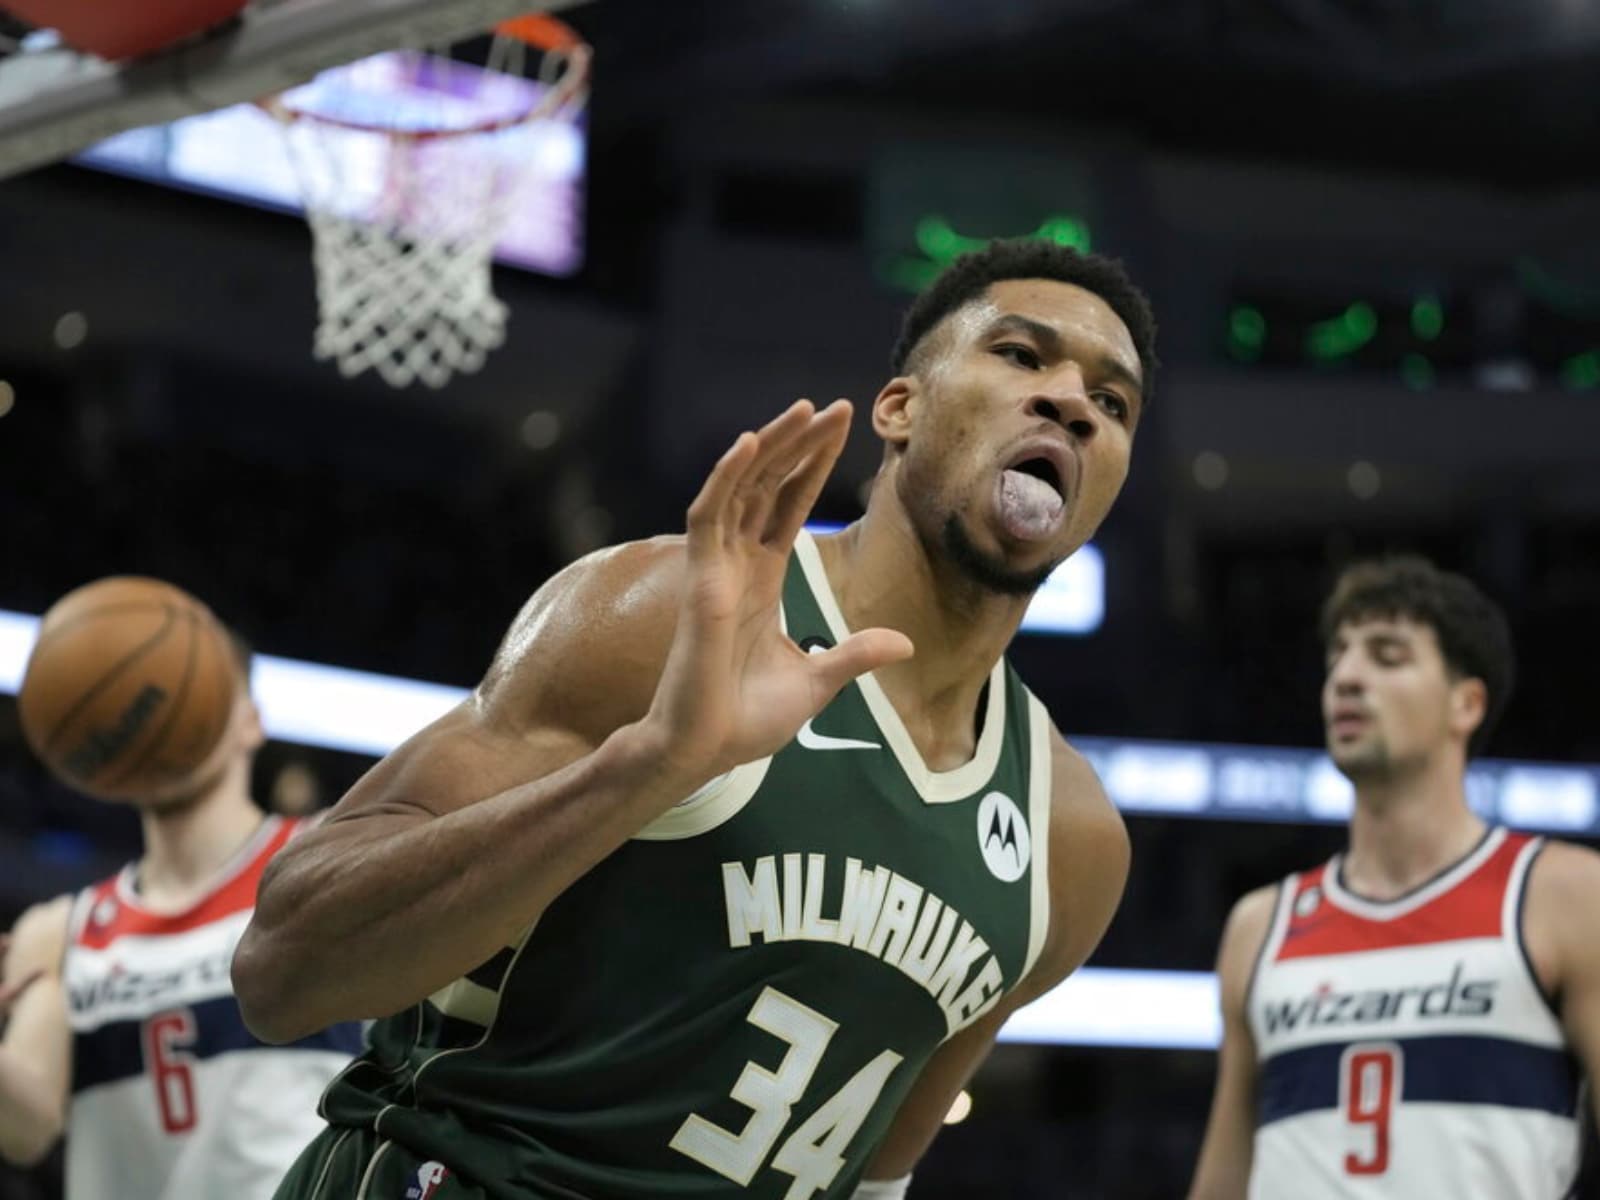 NBA All Star Game 2023: Basketball Player Giannis Antetokounmpo Is Glad Ranveer  Singh Played for His Team